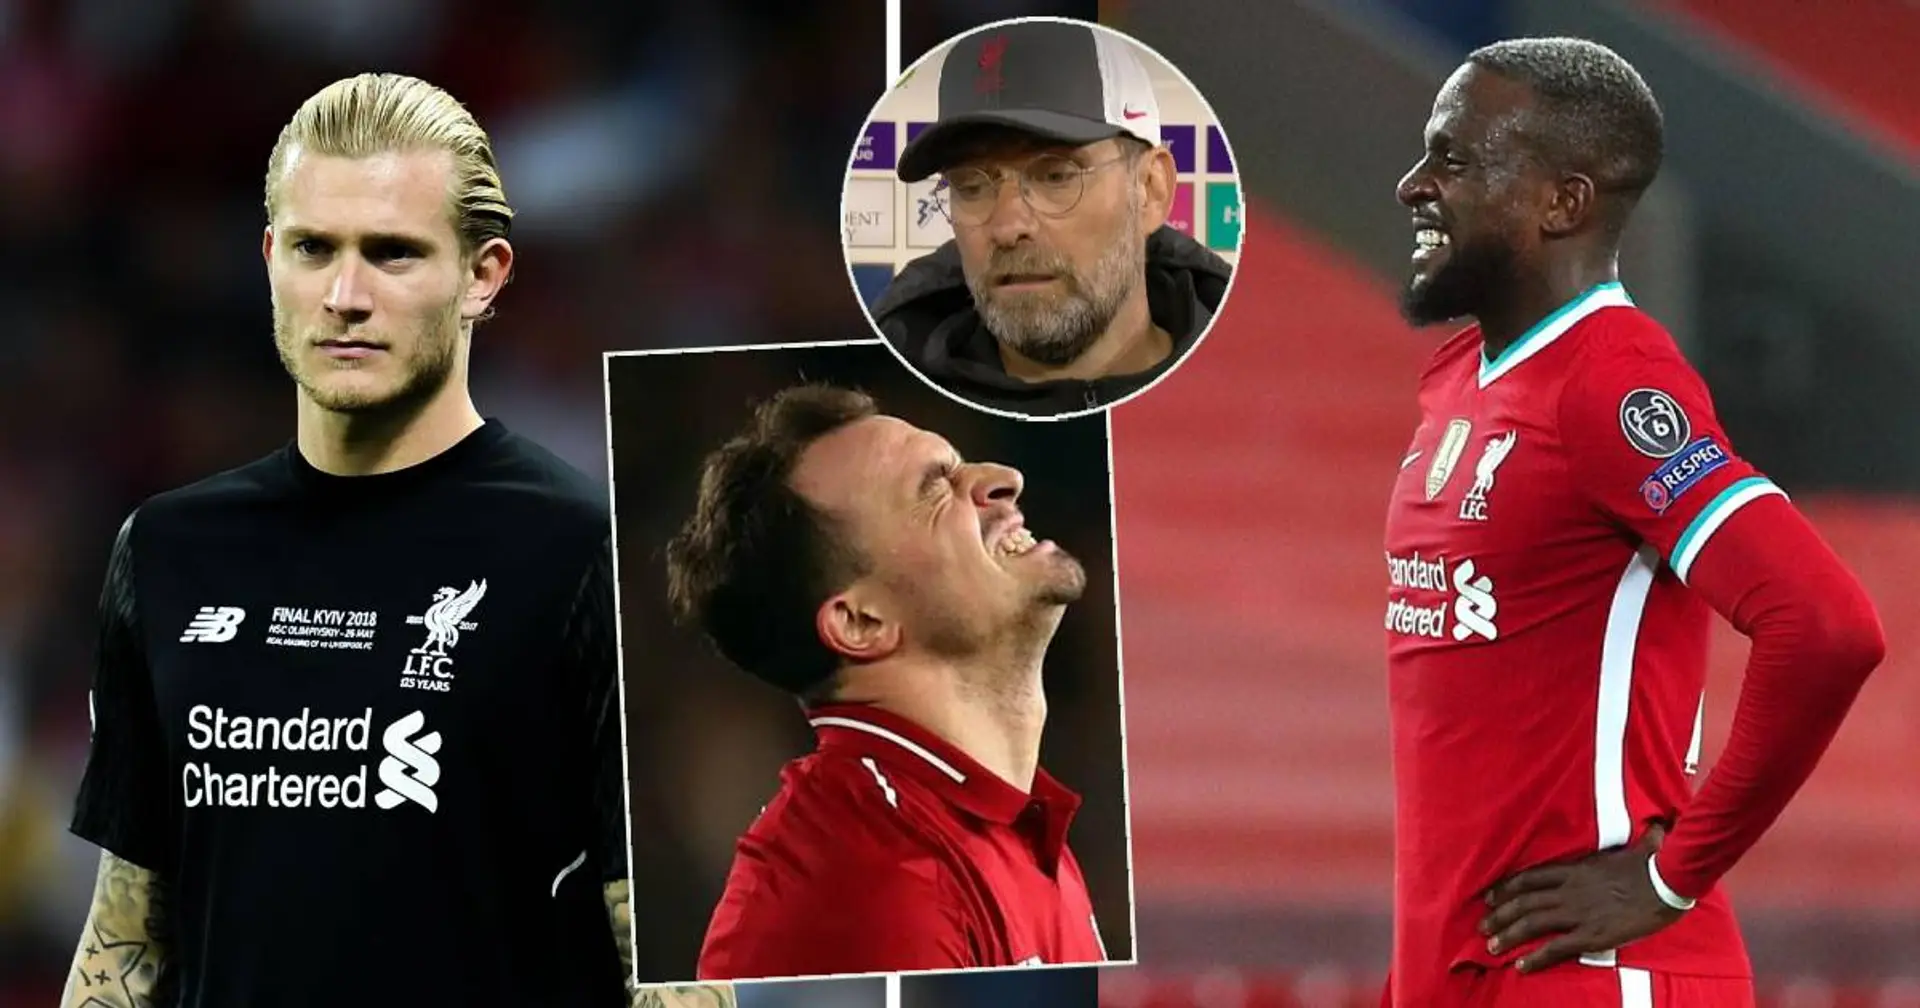 Liverpool hoped to sell Origi, Shaq and 4 other players last season - Reds' summer exodus plans revealed: The Athletic